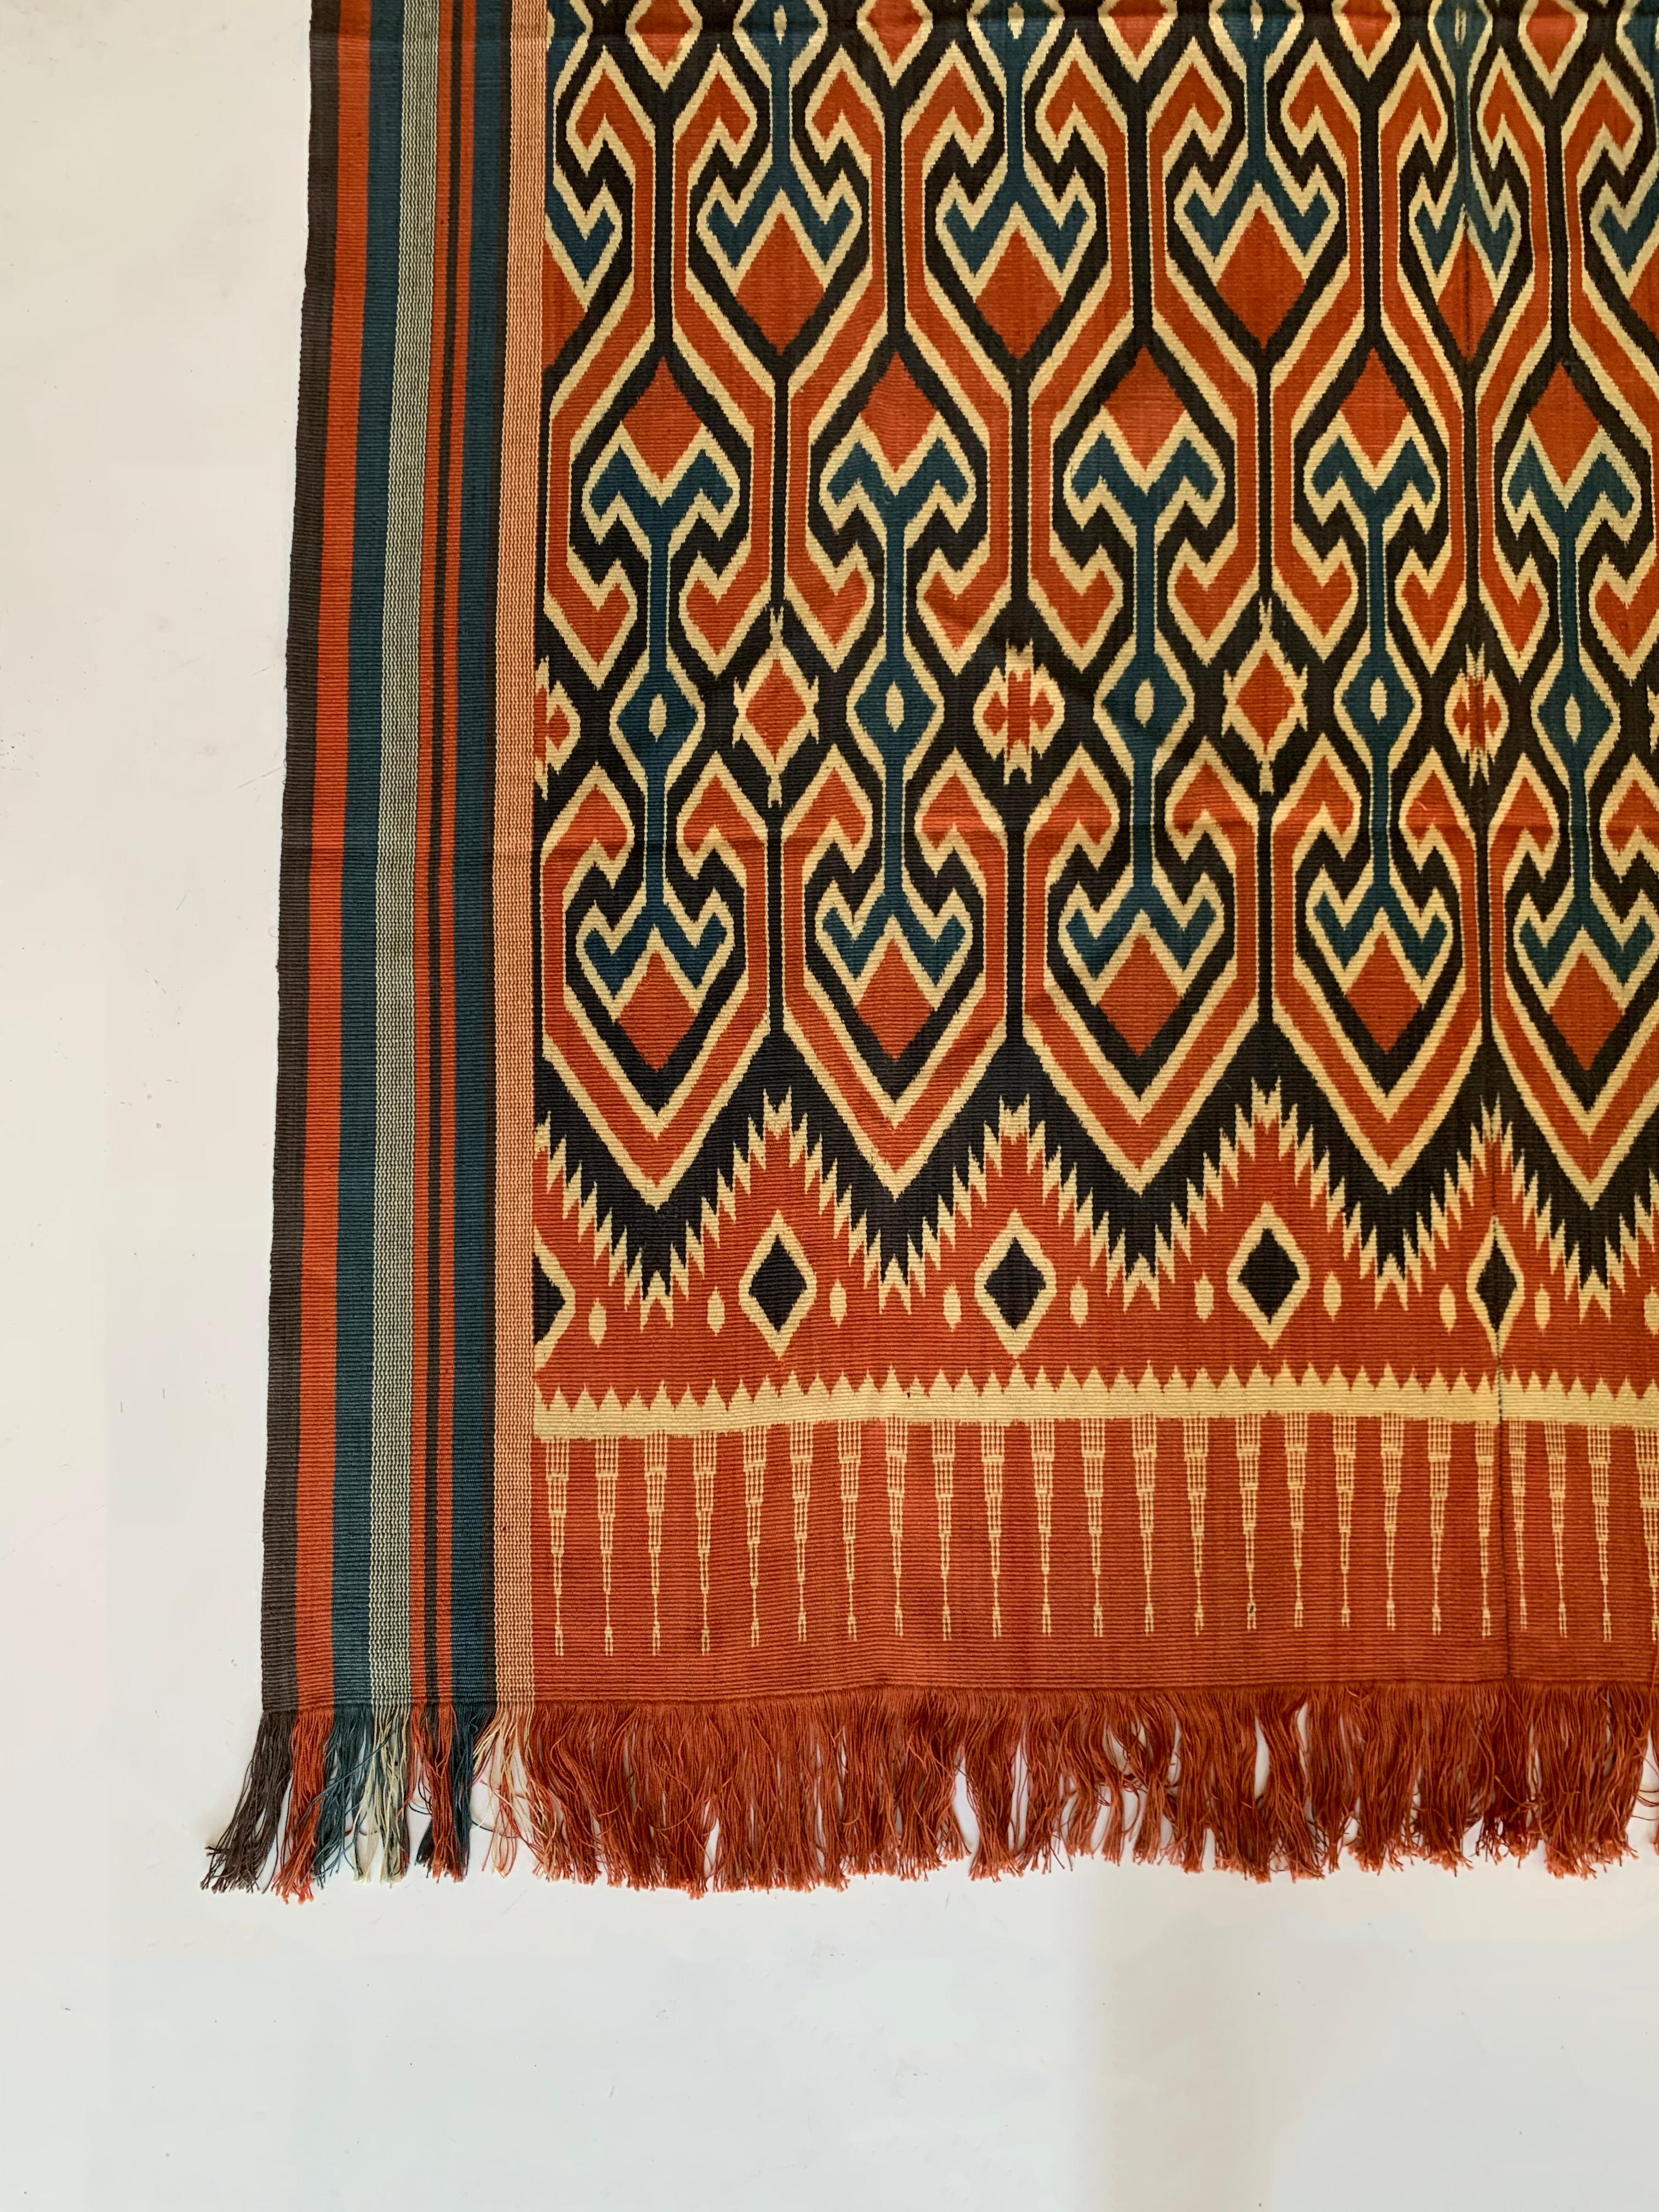 Indonesian Ikat Textile from Toraja Tribe of Sulawesi with Stunning Tribal Motifs